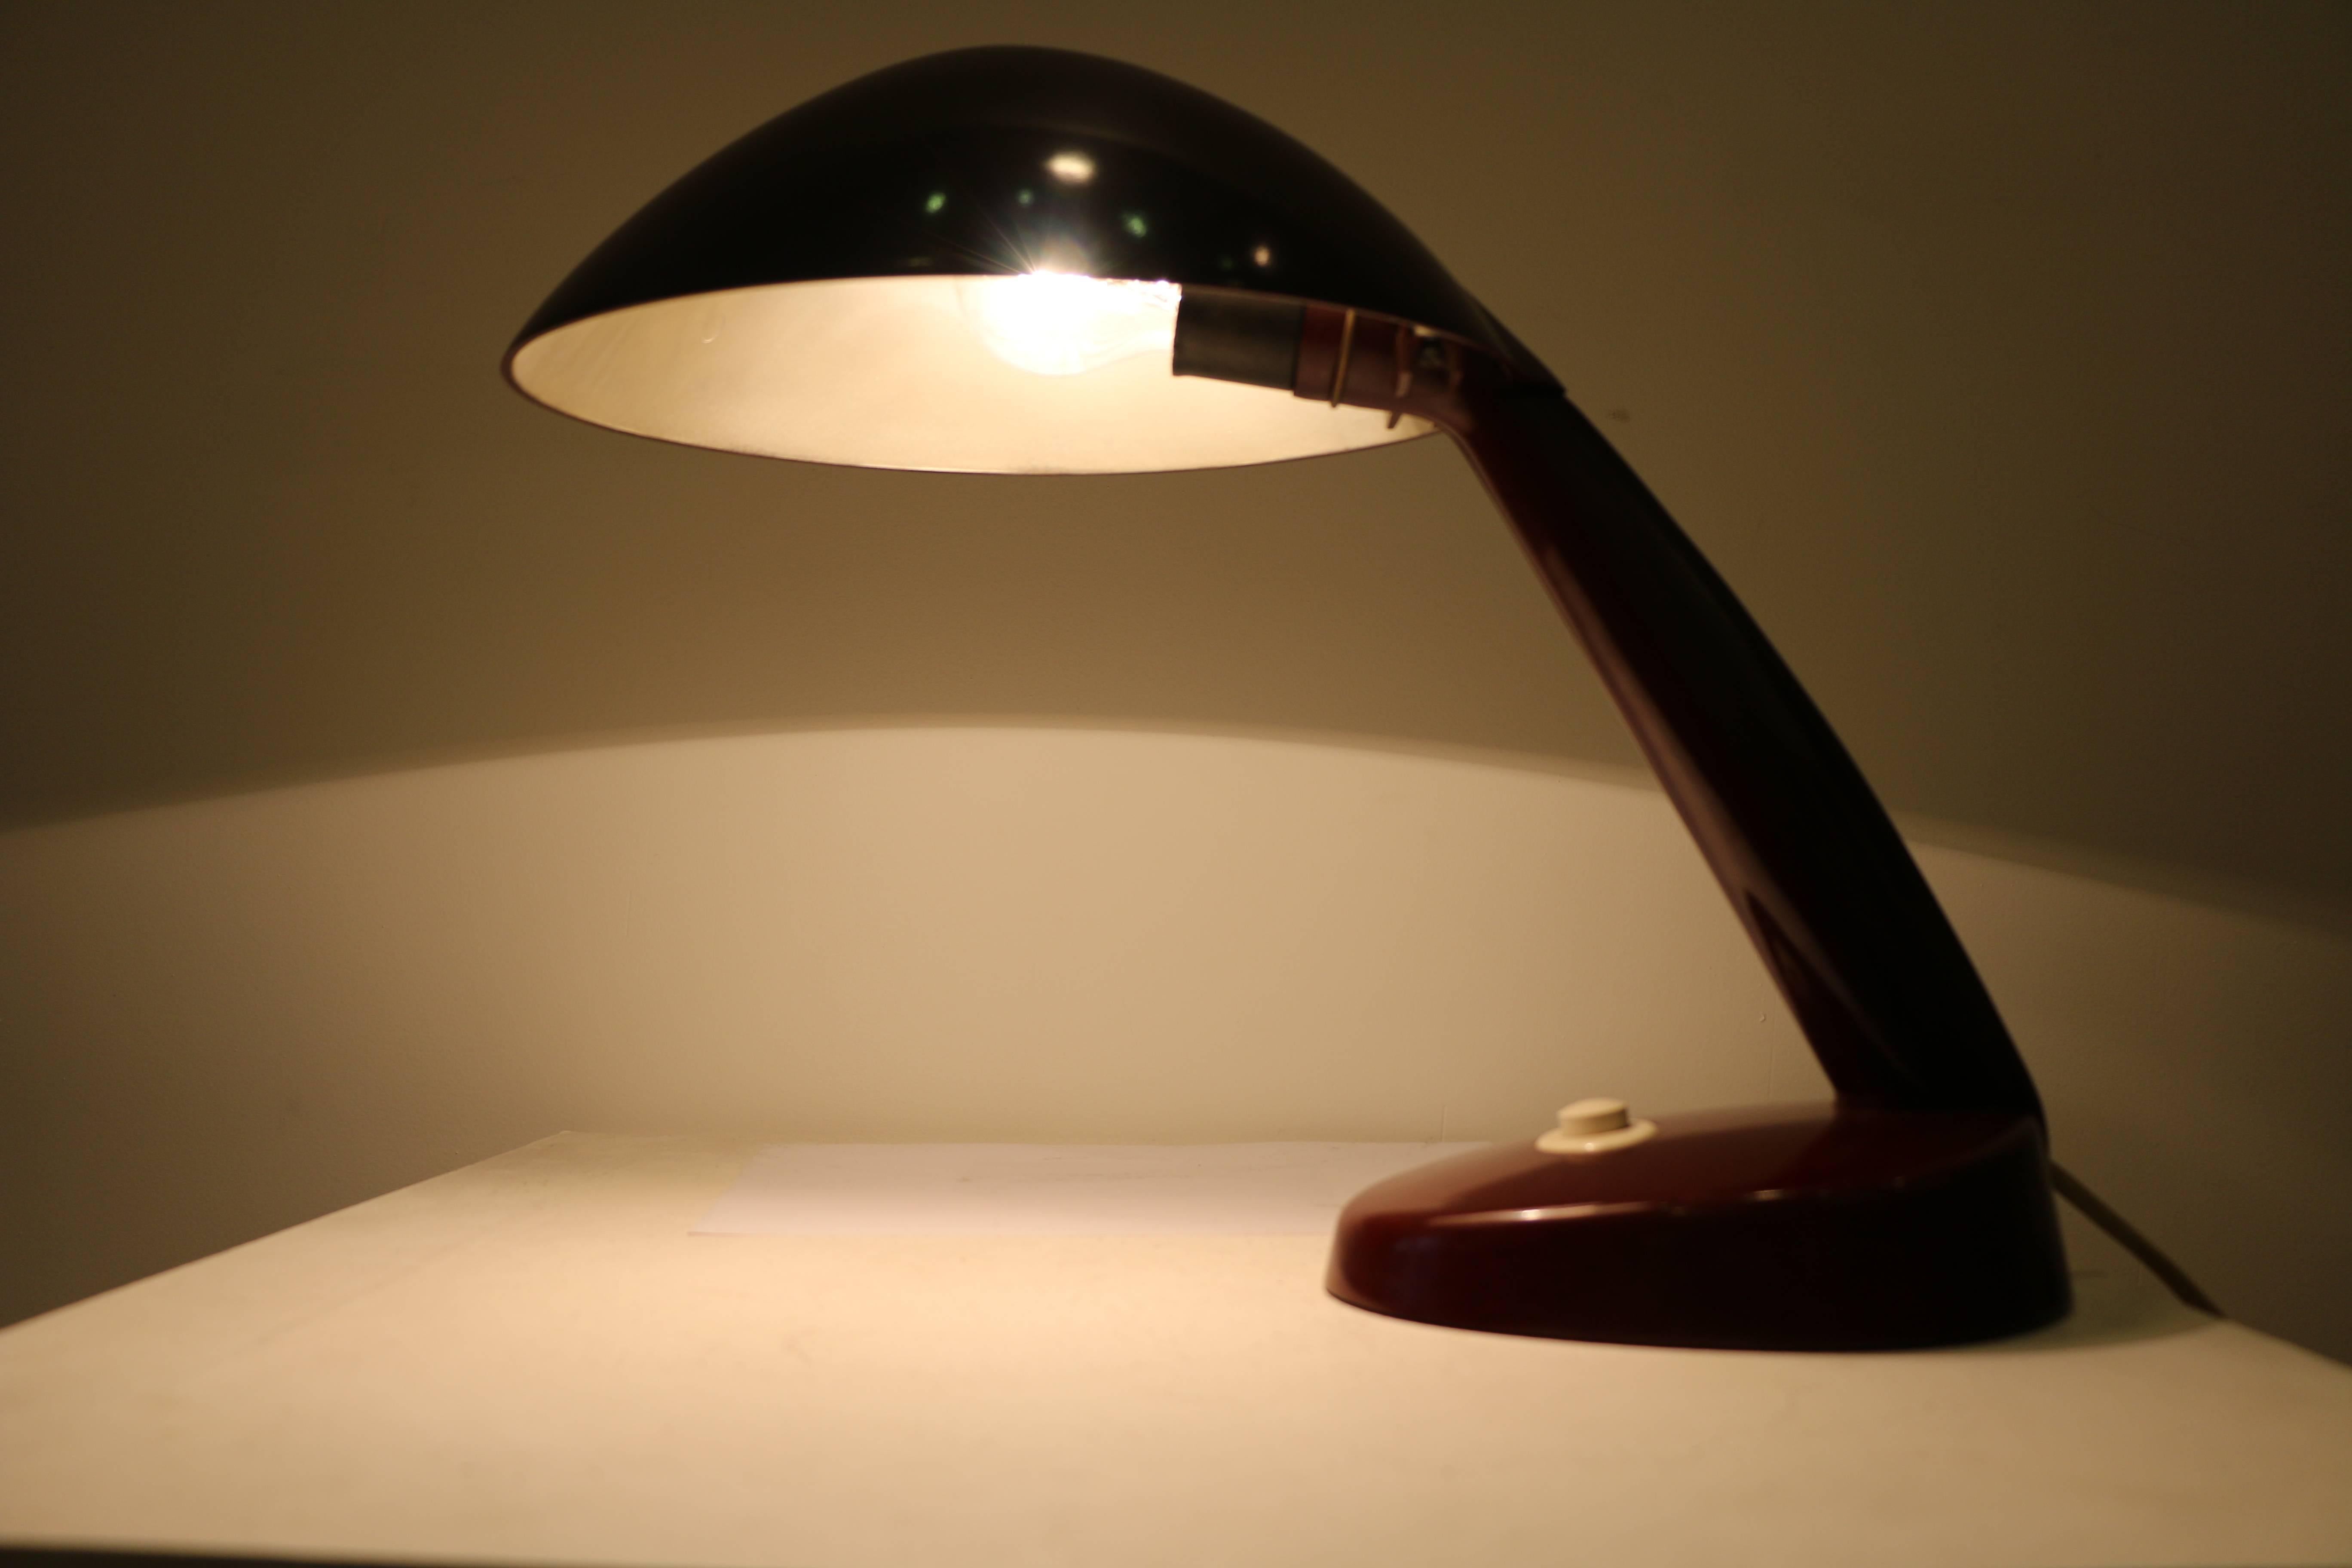 German Rare Kandem Bakelite Table Lamp Attributed to Marianne Brandt, circa 1945 For Sale